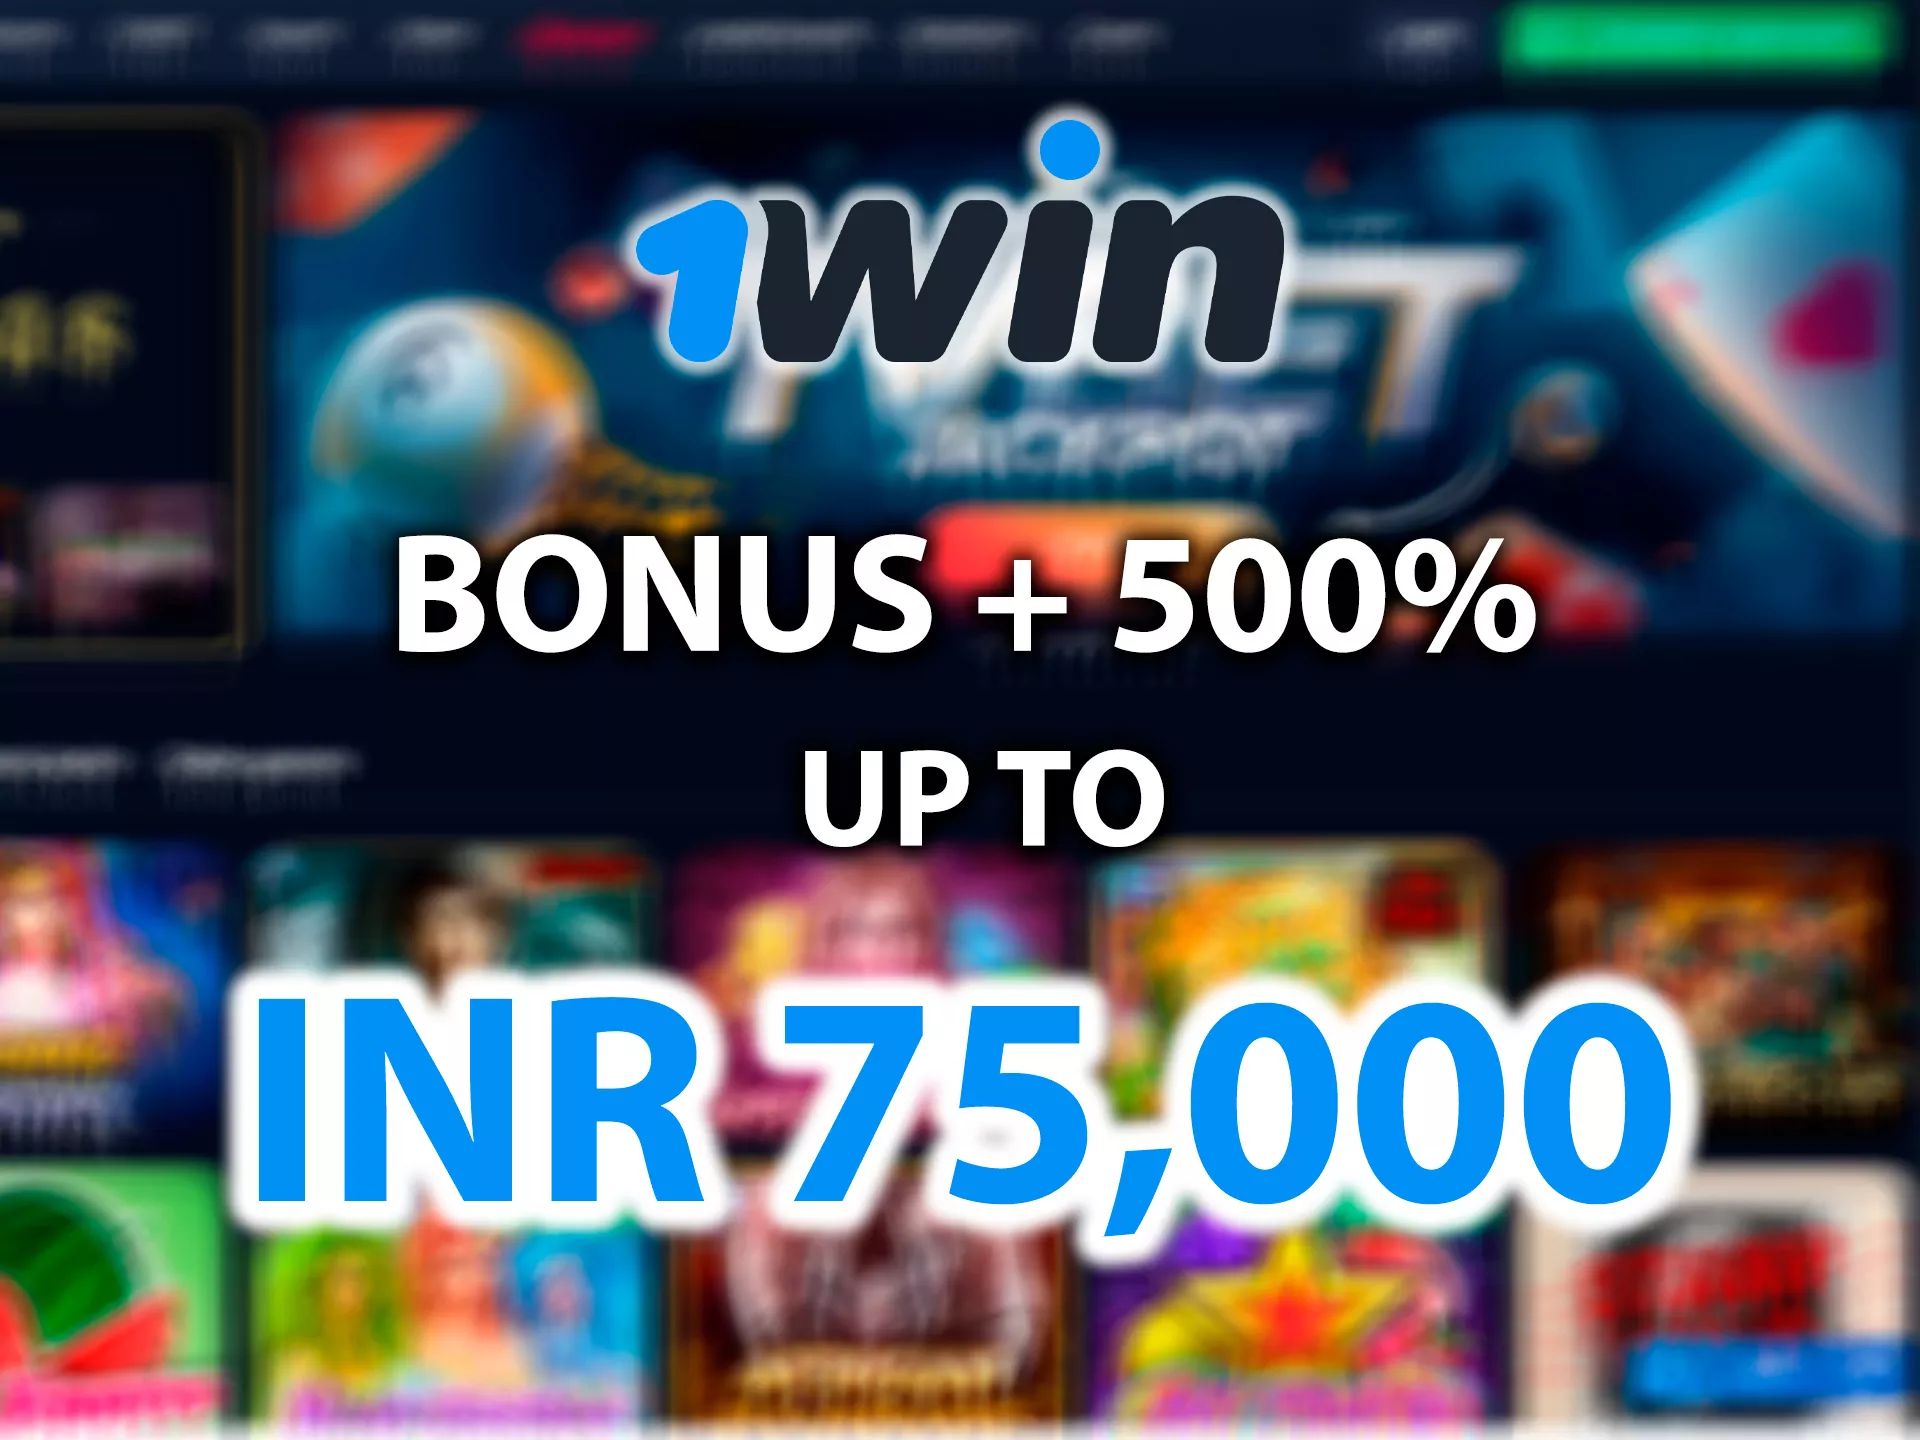 The Ultimate Deal On 1win minimum withdrawal